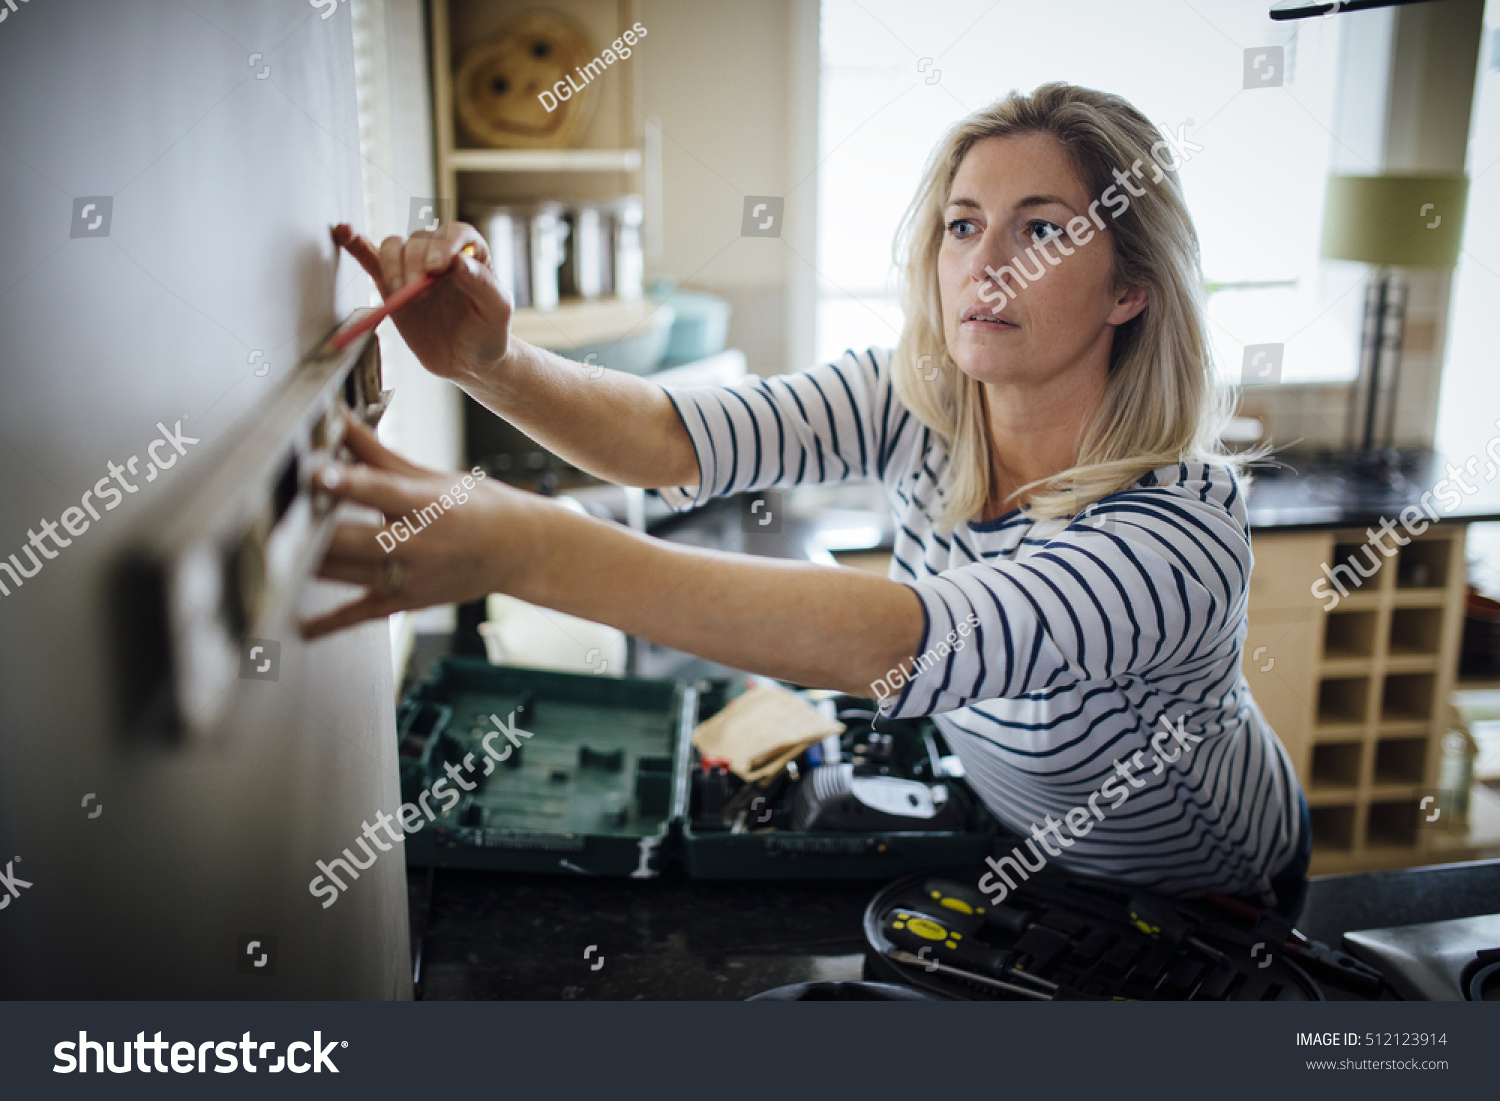 Mature woman using a spirit level and marking the wall with a pencil in her kitchen. #512123914